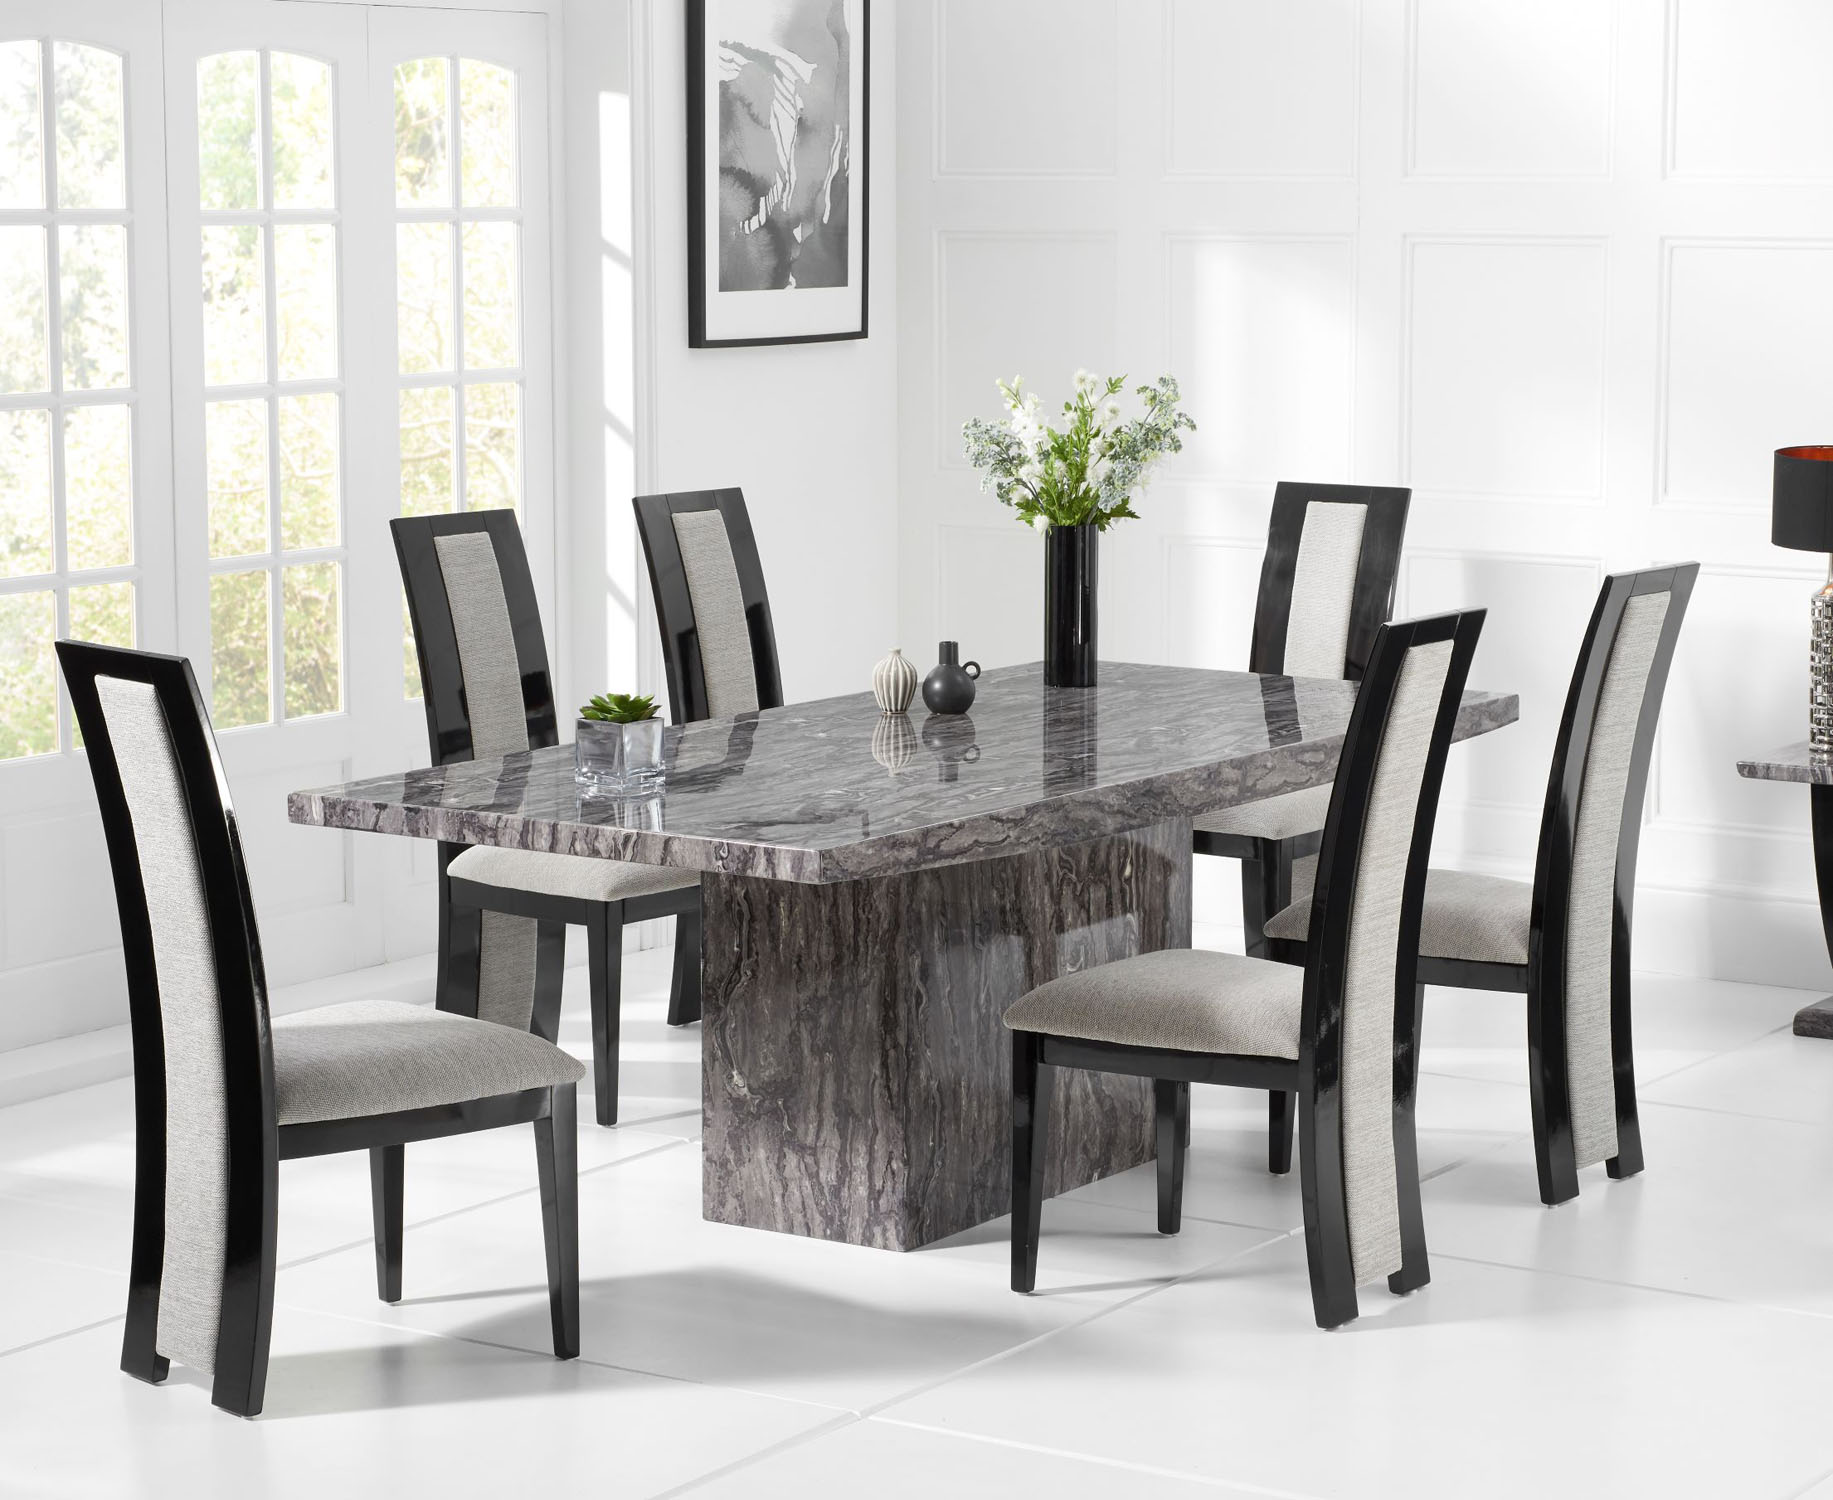 Five Ways to Update Old Dining Room Table and Chairs